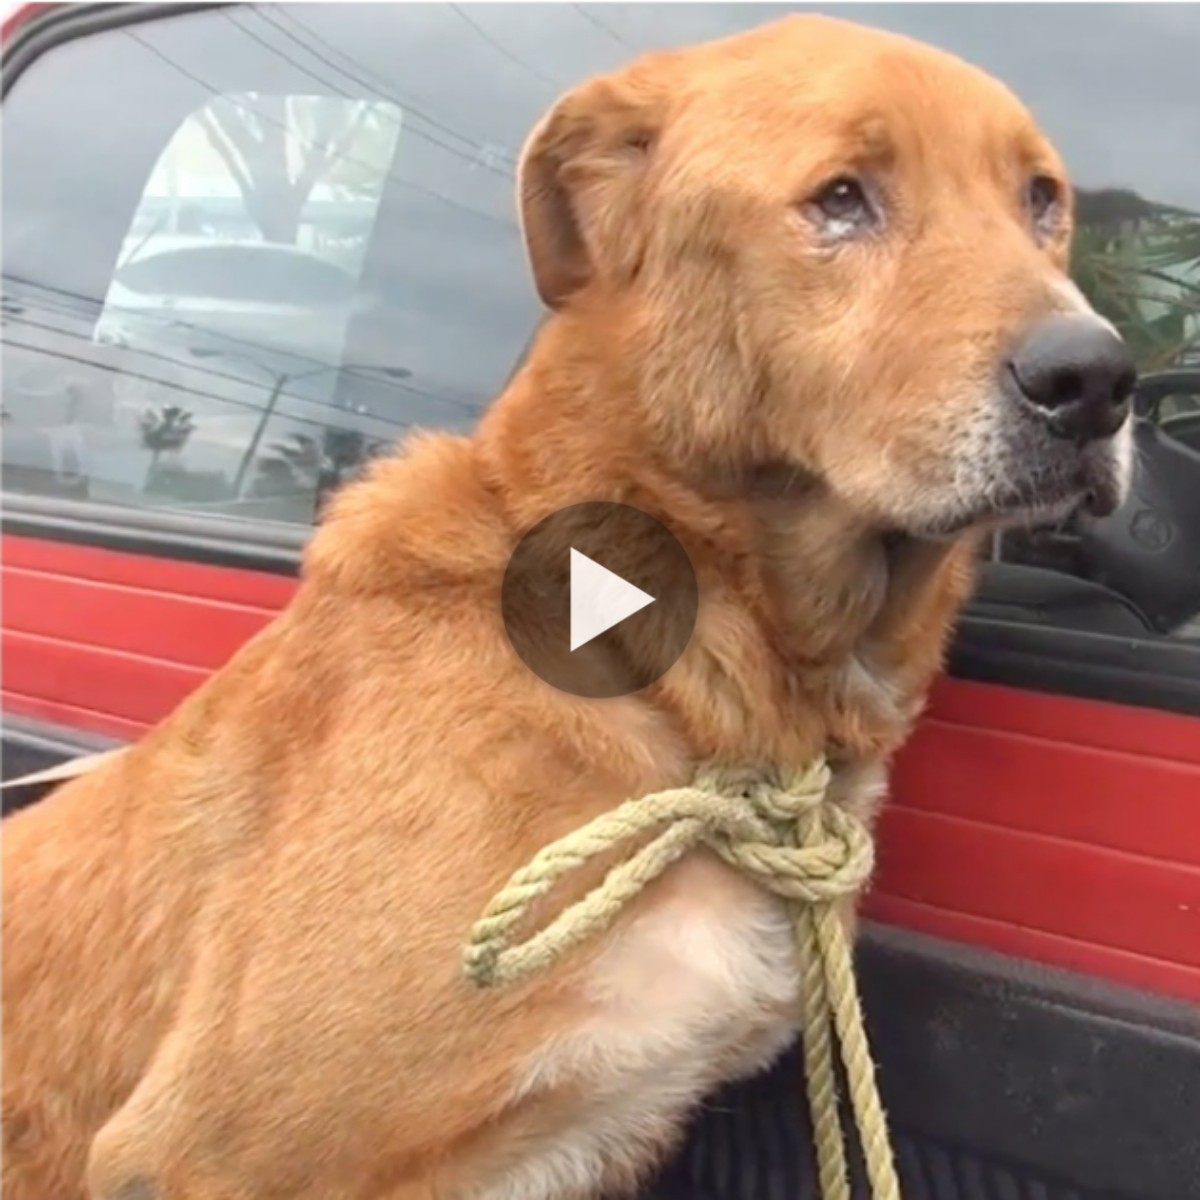 The old dog had to wander the streets to earn a living, disappointed and sad because he received no help. (Video)